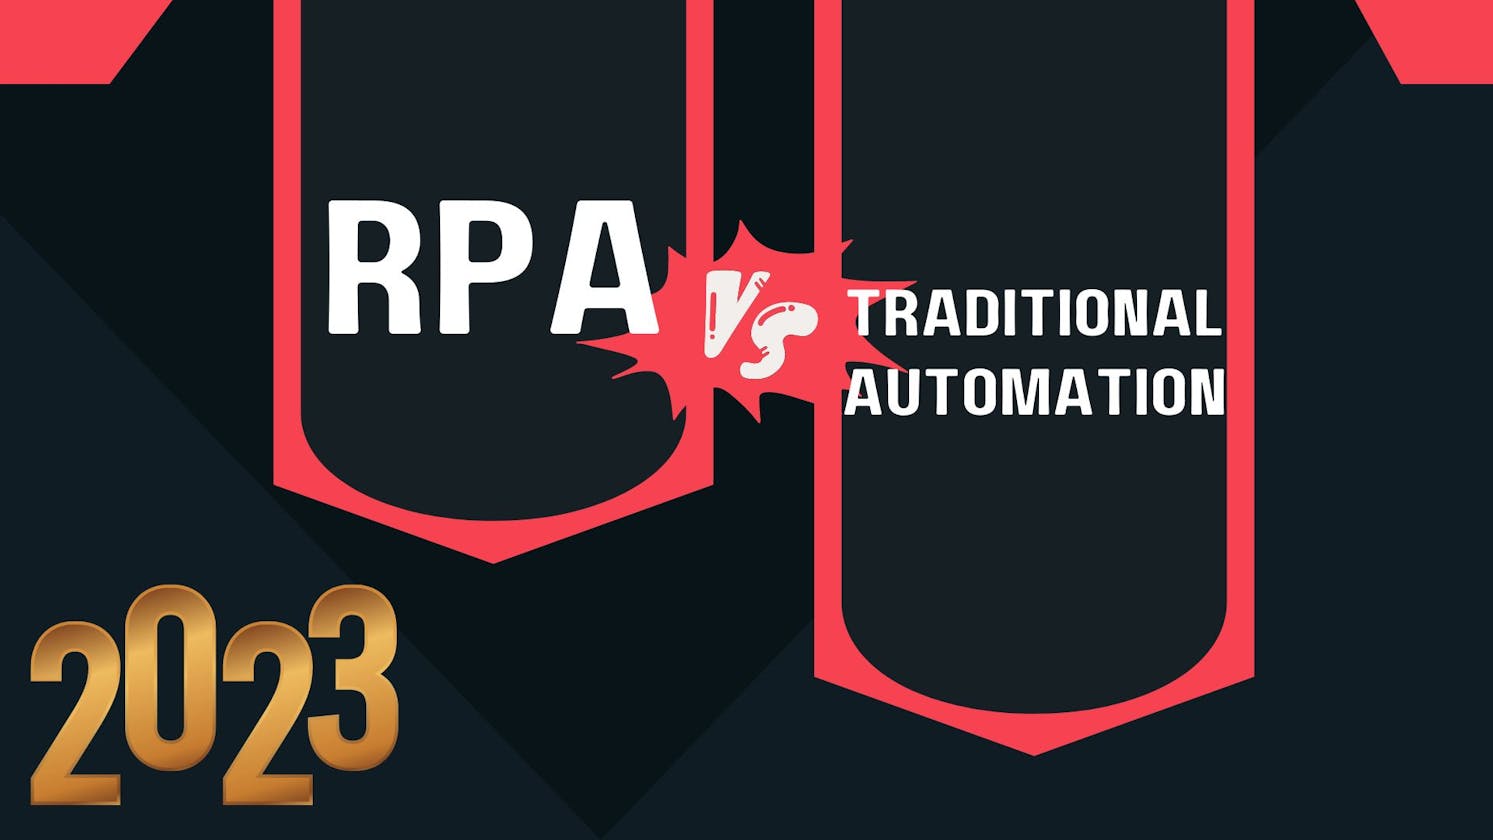 RPA vs. Traditional Automation in 2023